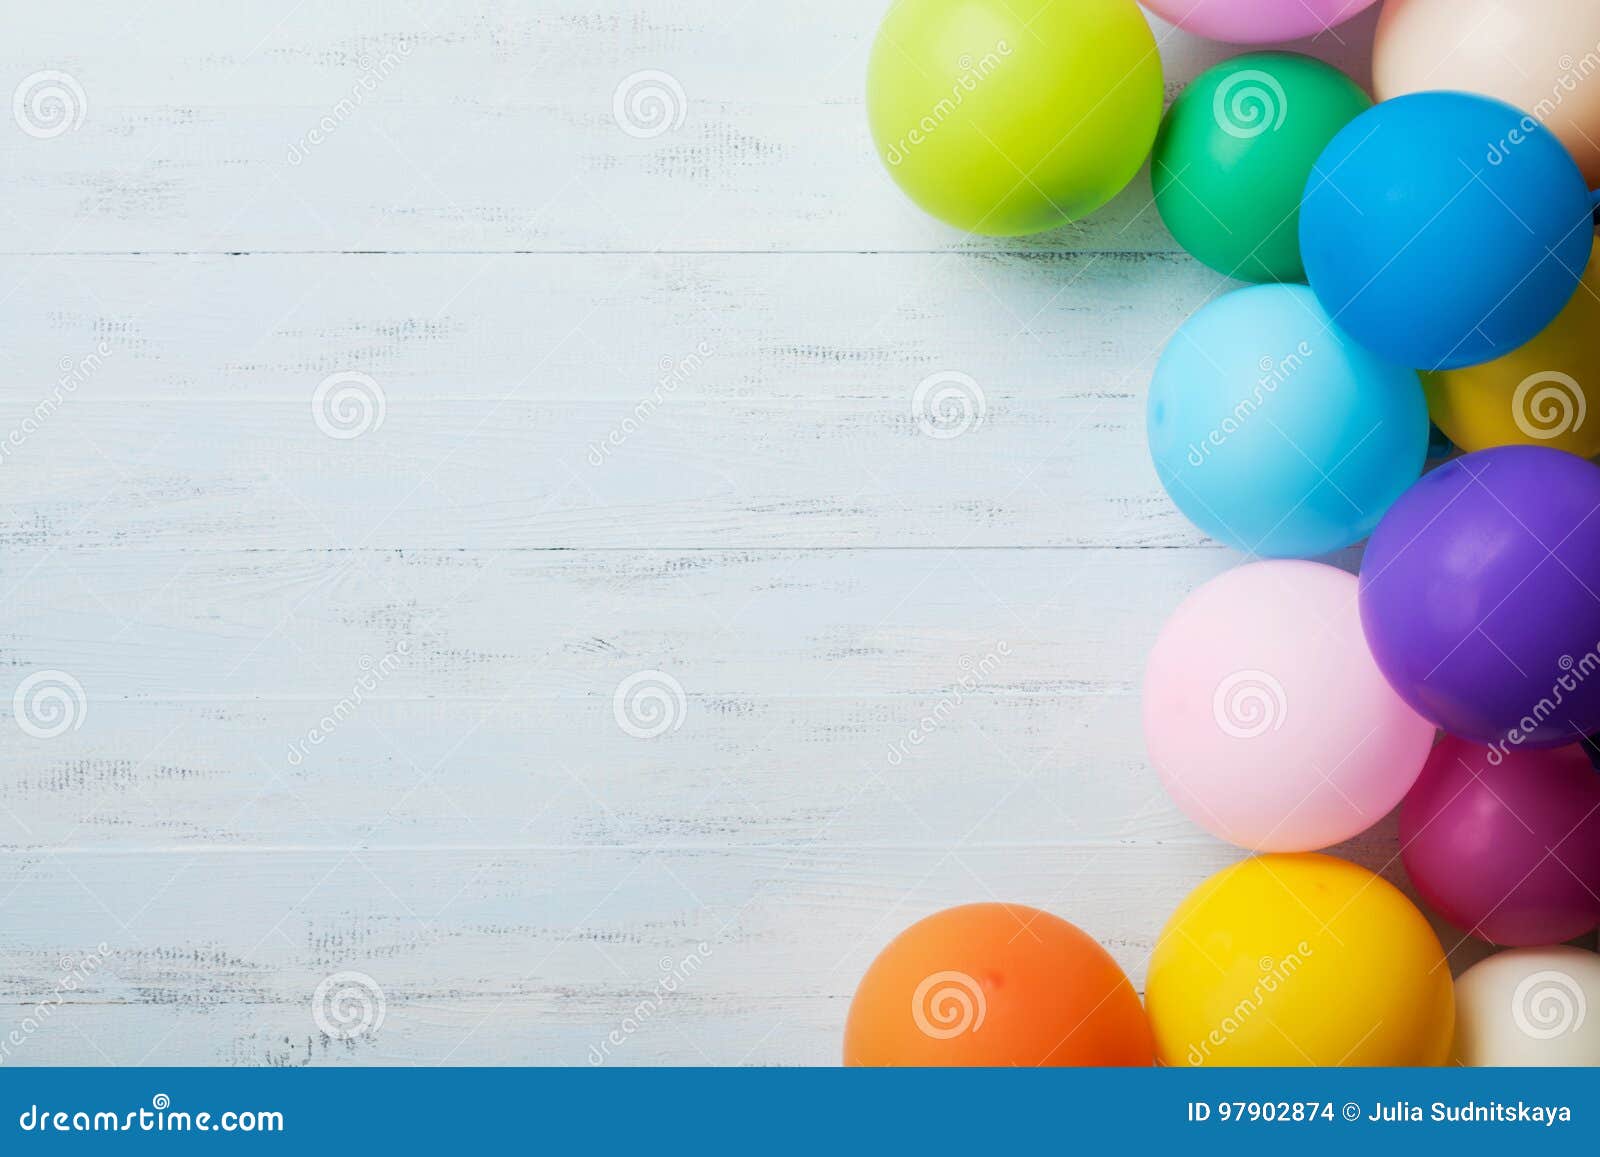 heap of colorful balloons on blue wooden table top view. birthday or party background. flat lay style. copy space for text.